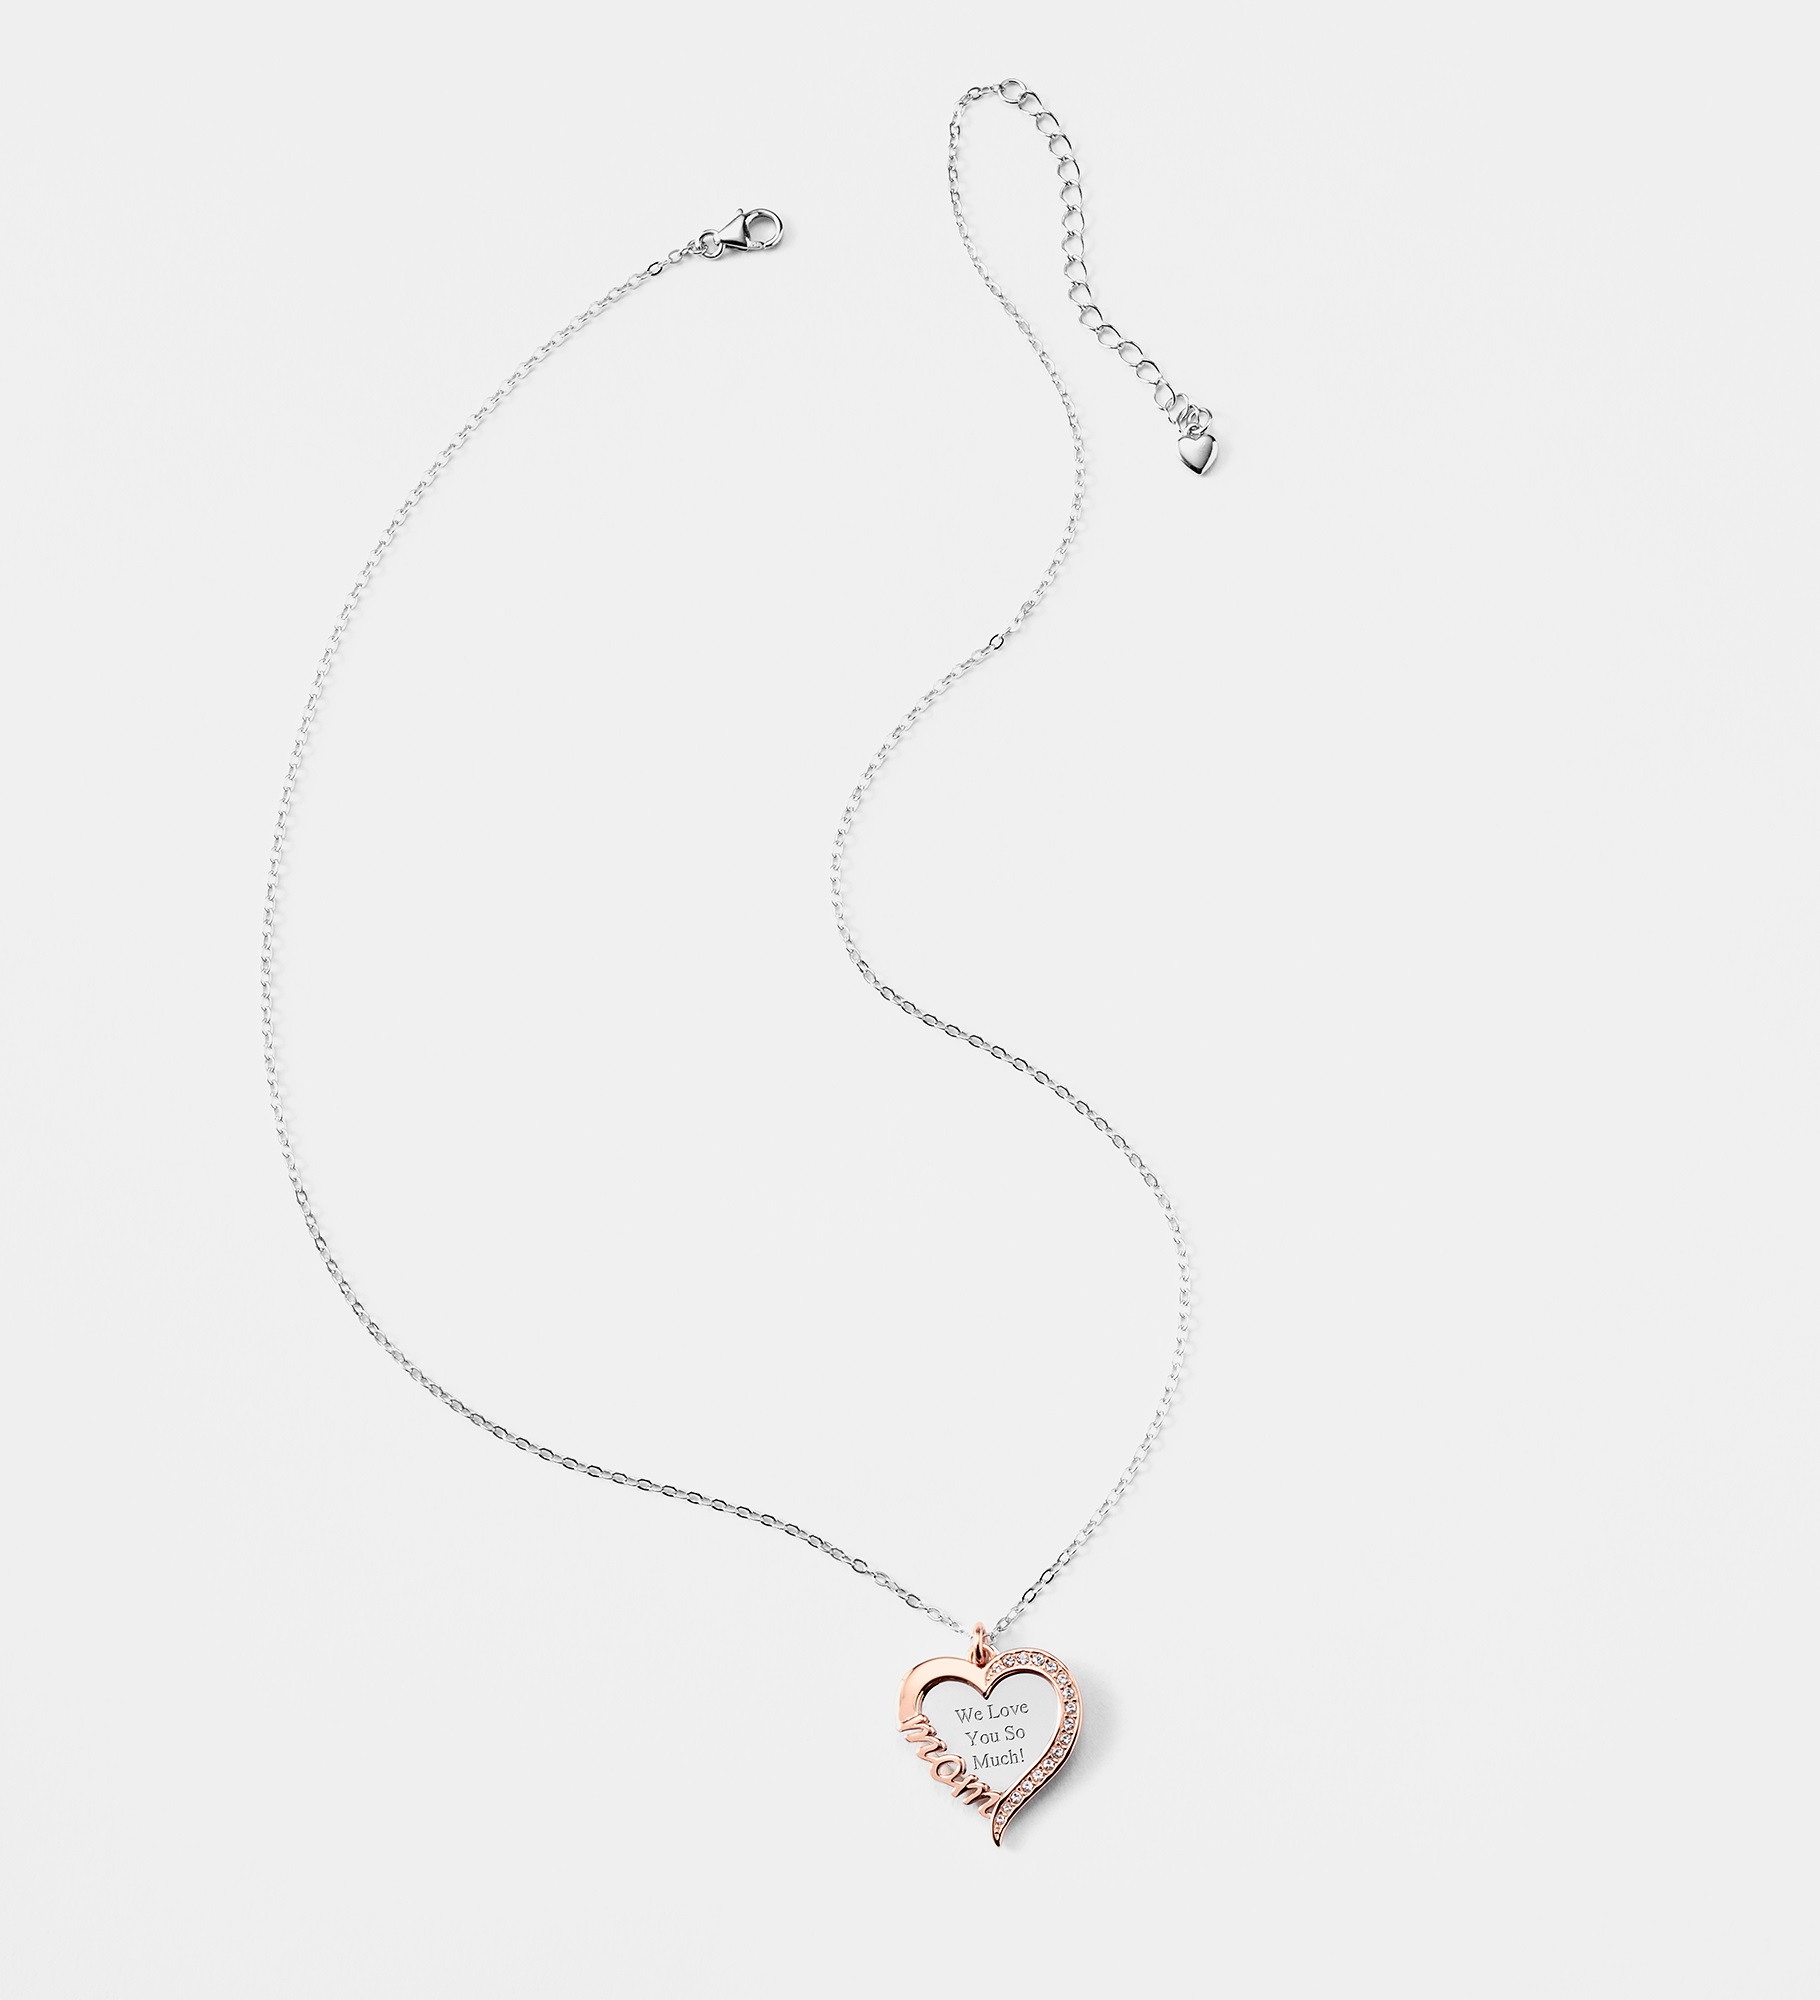 Engraved Sterling Silver/Rose Gold Mom Heart Swing Necklace